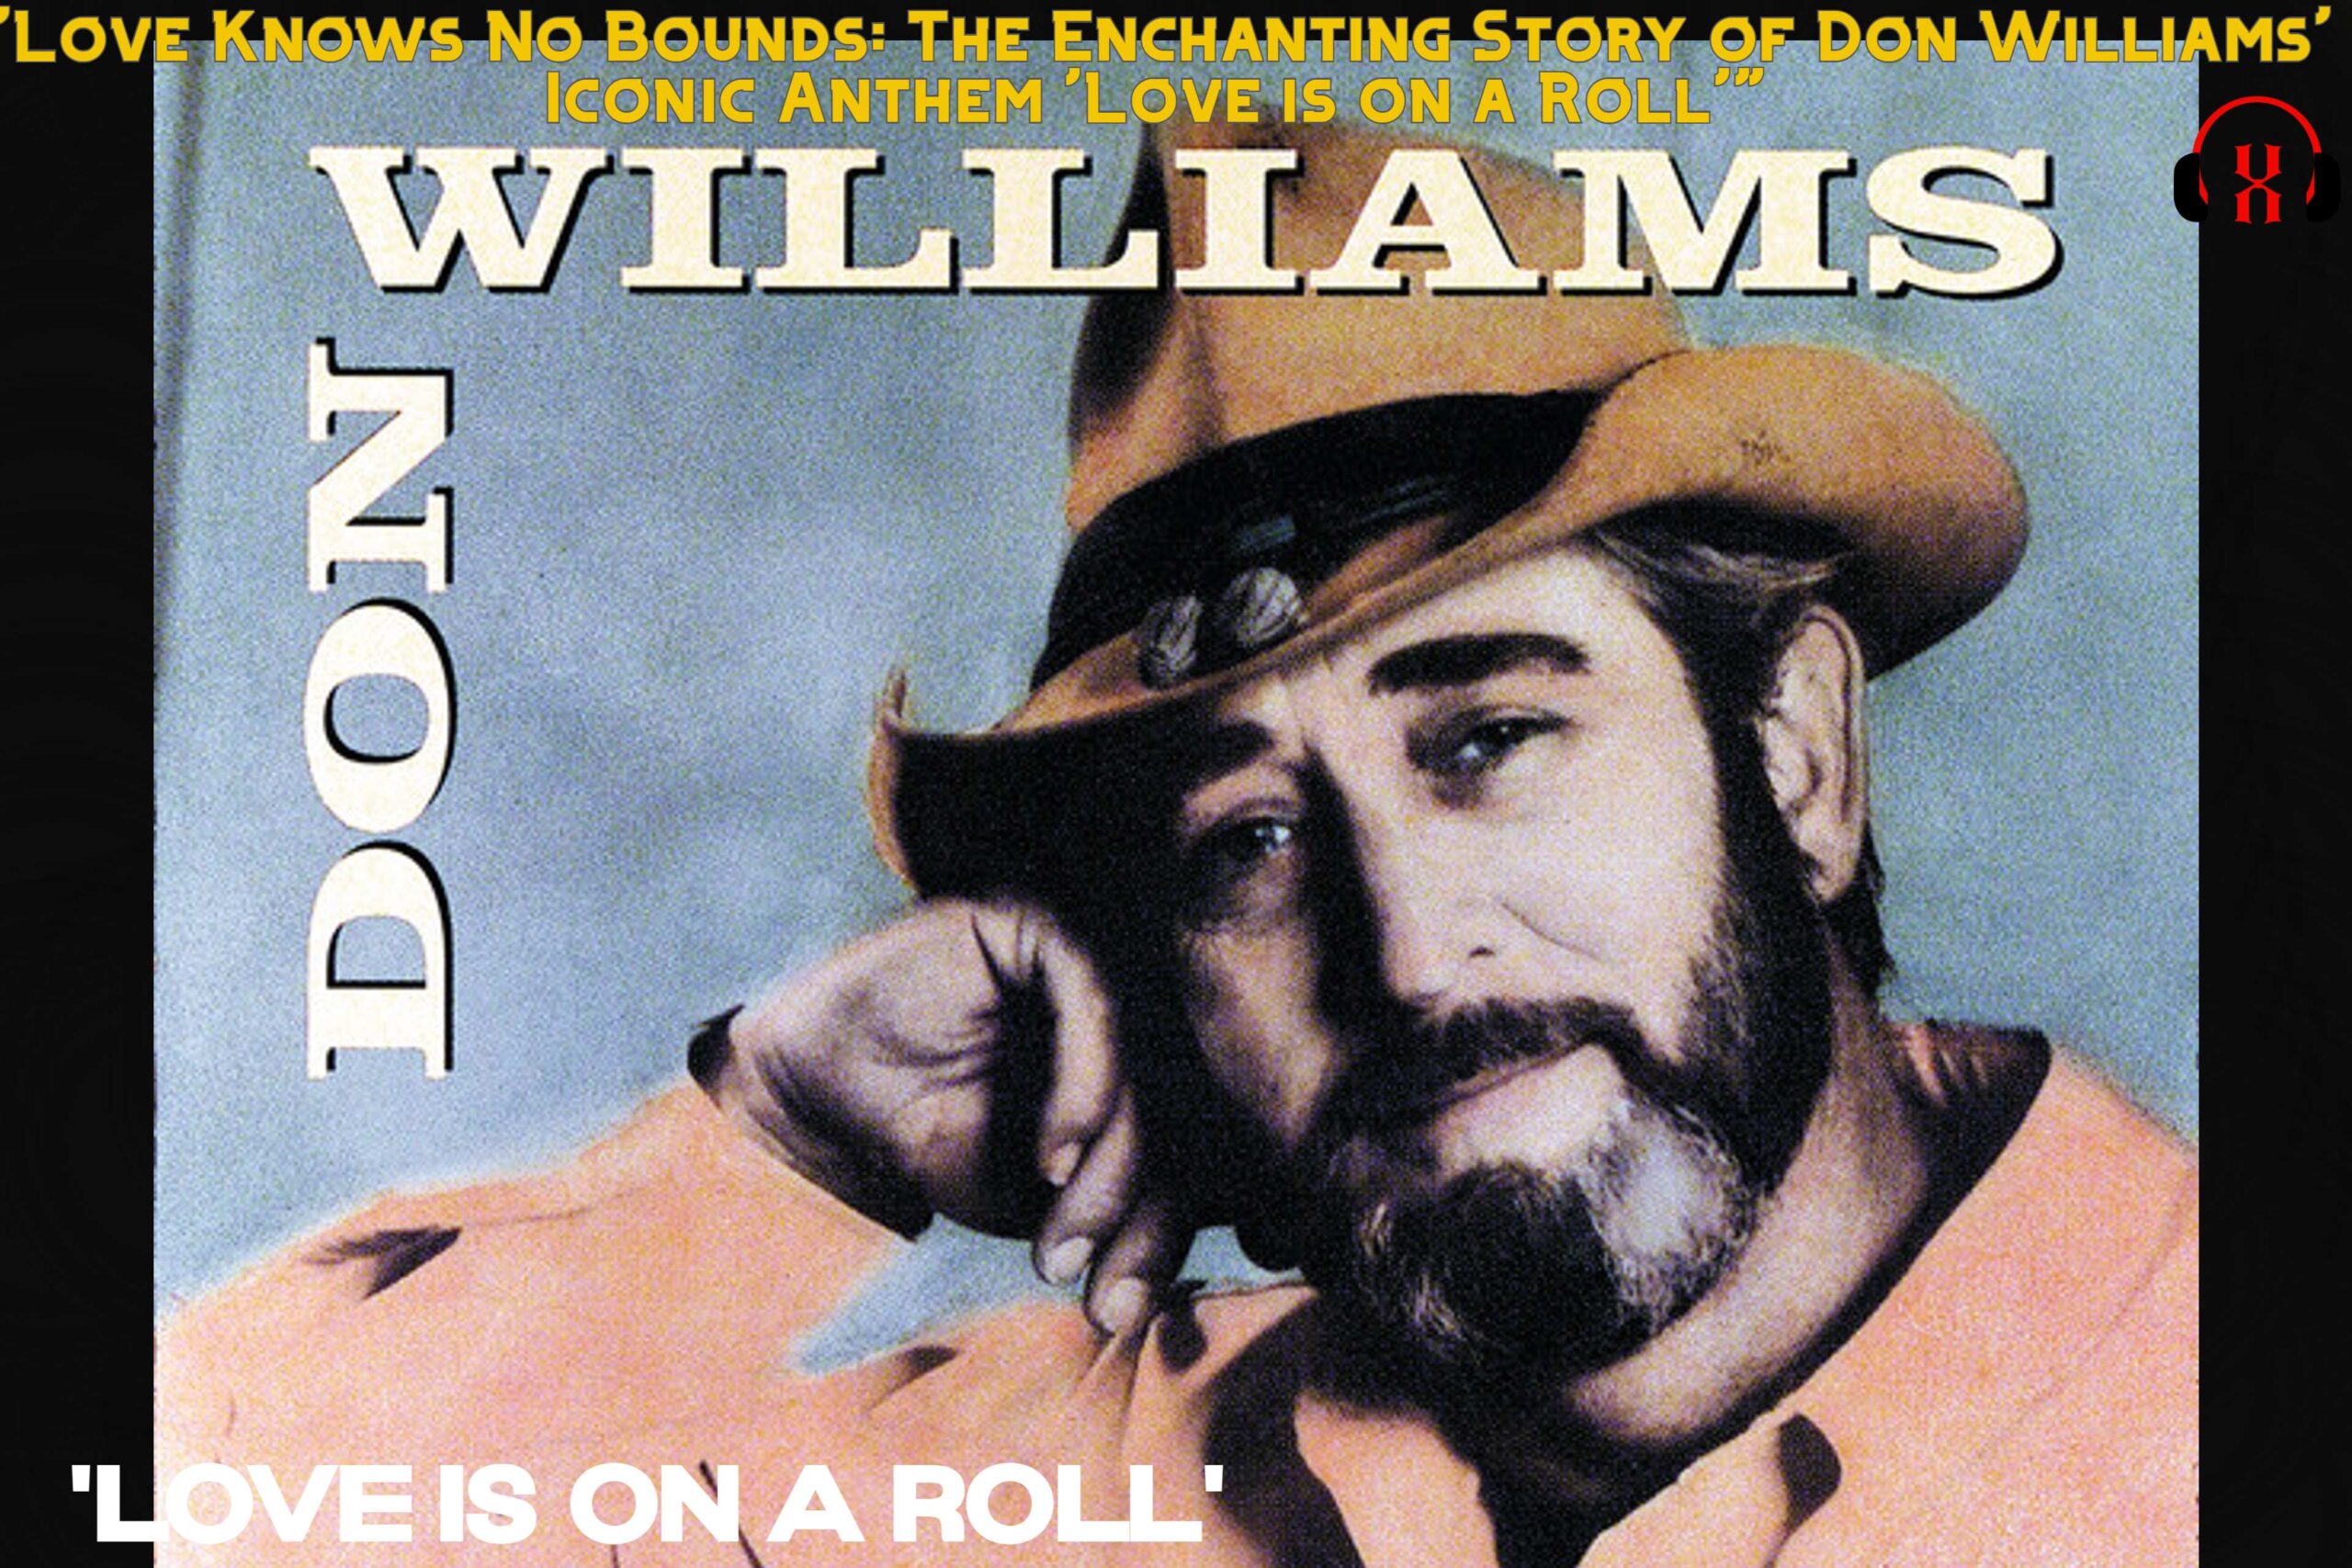 “Love Knows No Bounds: The Enchanting Story of Don Williams’ Iconic Anthem ‘Love is on a Roll'”